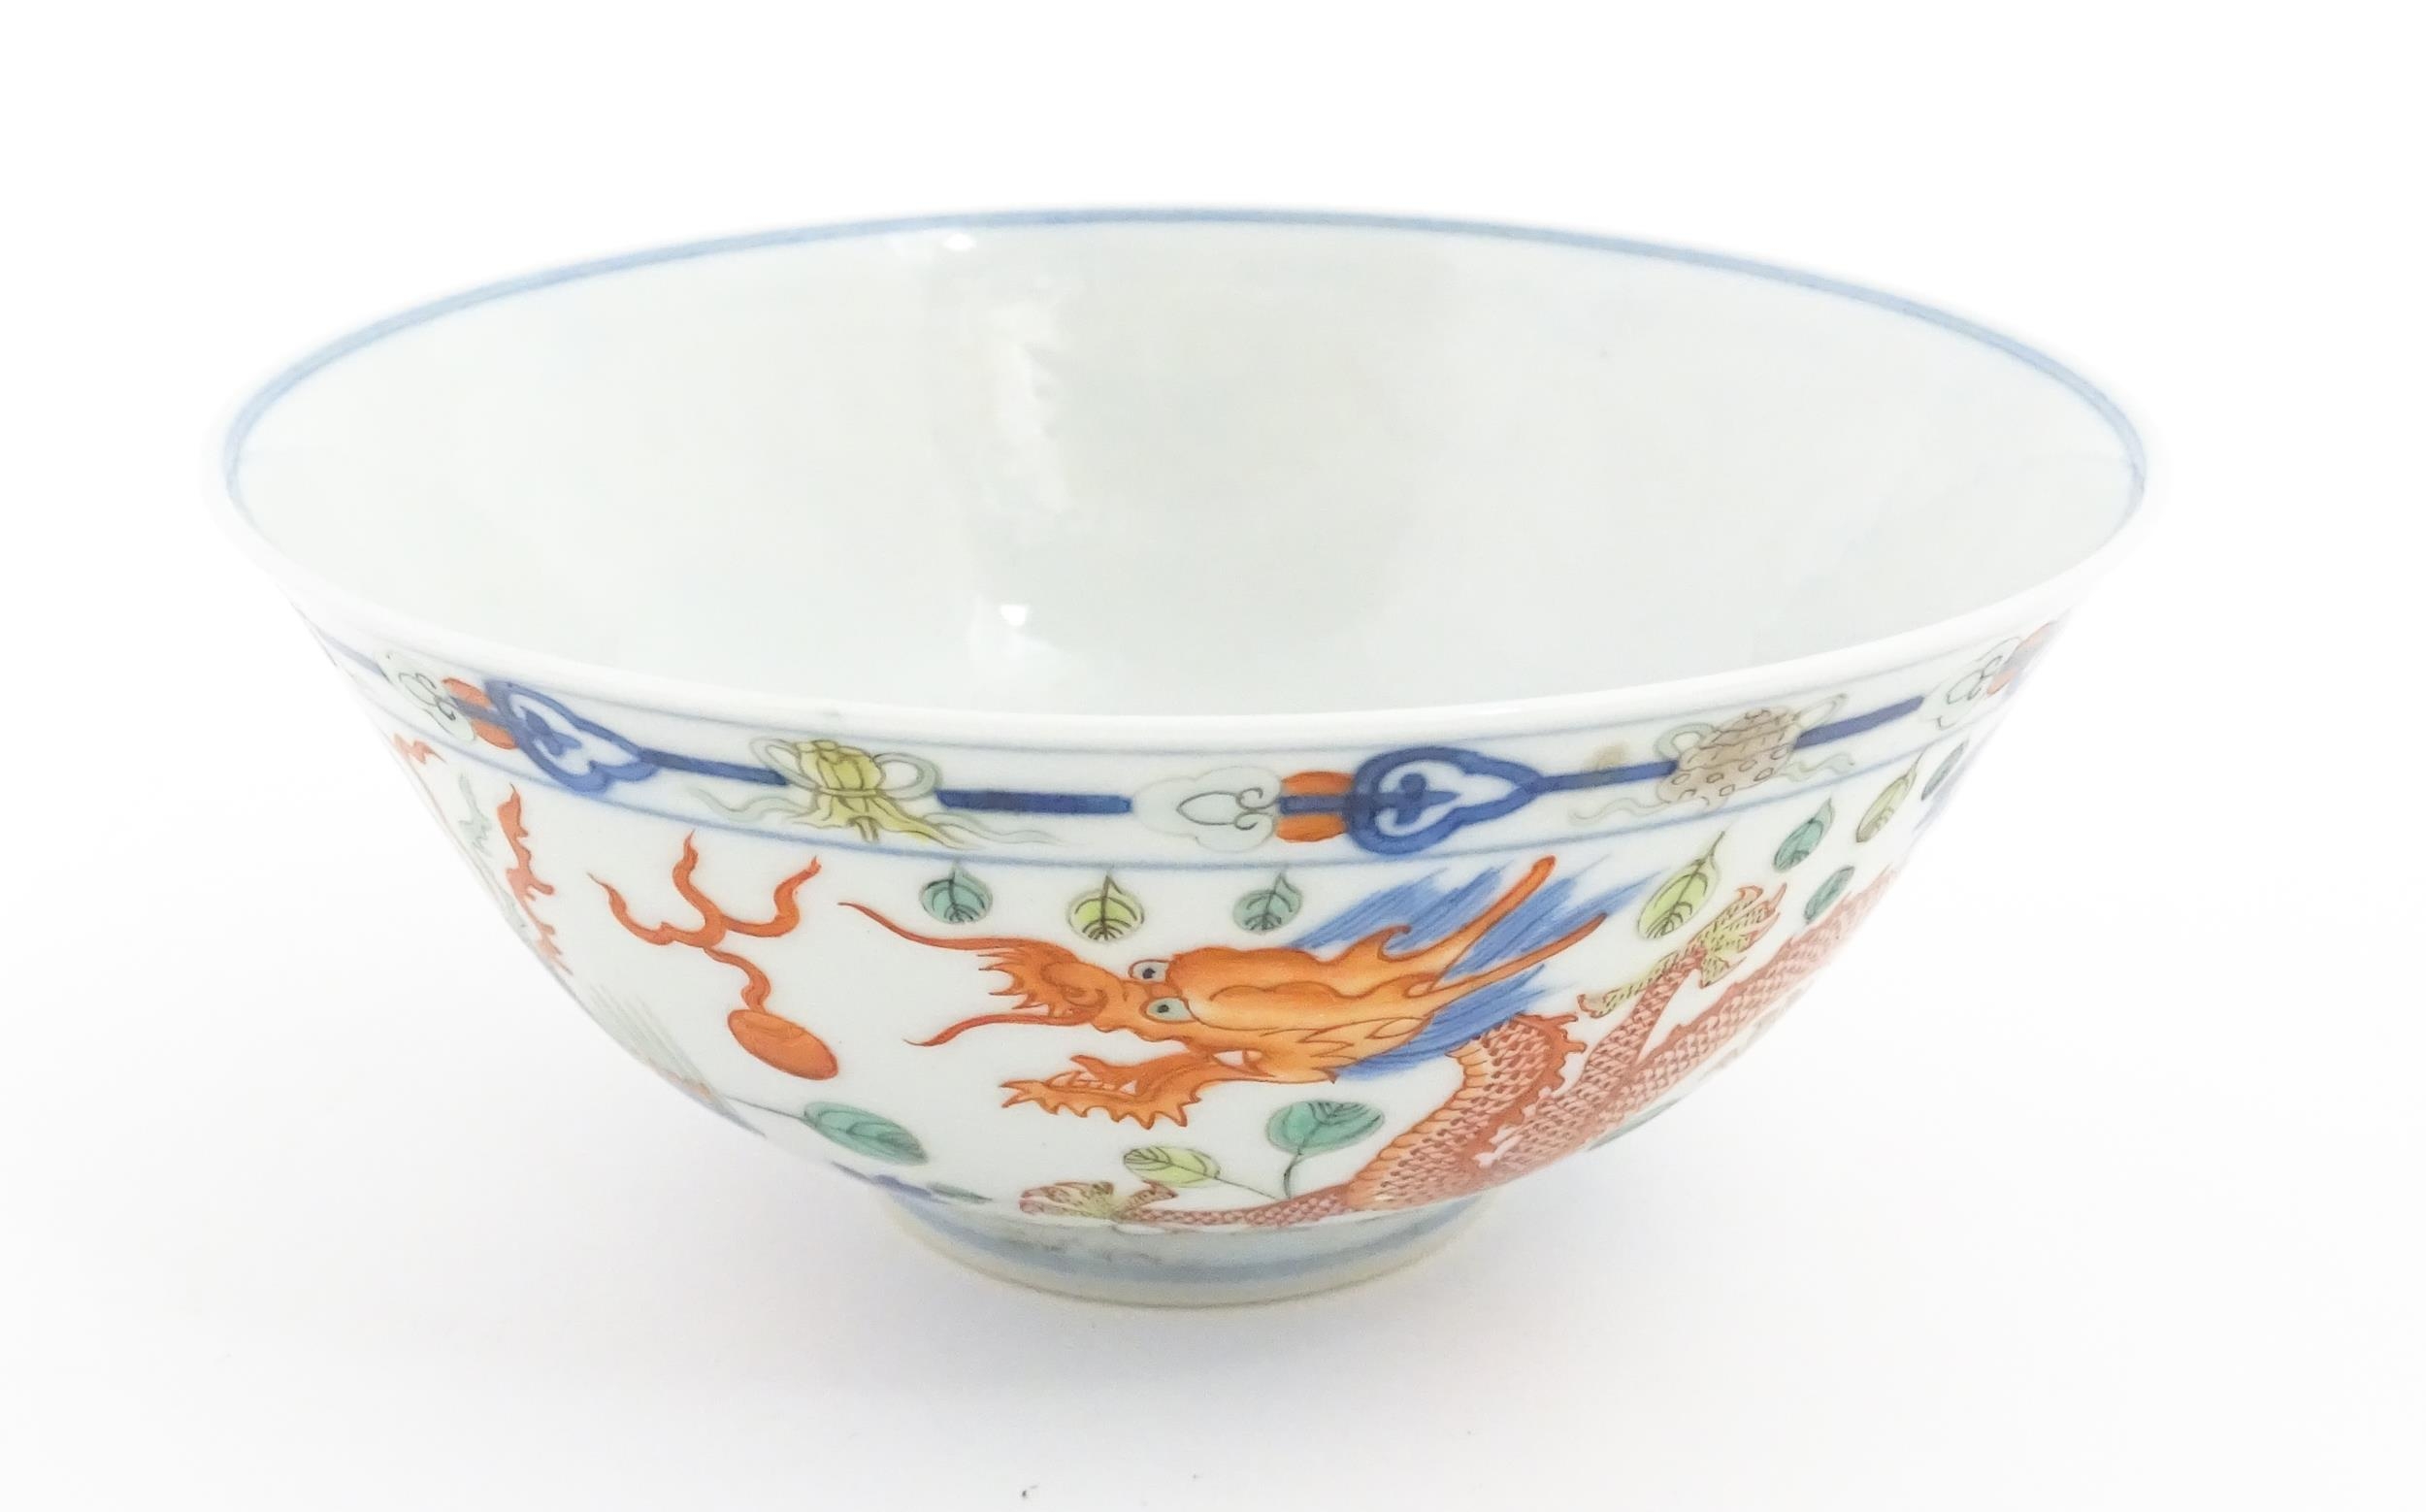 A Chinese bowl decorated with dragons, phoenix birds, flaming pearls and flowers. Character marks - Image 5 of 9